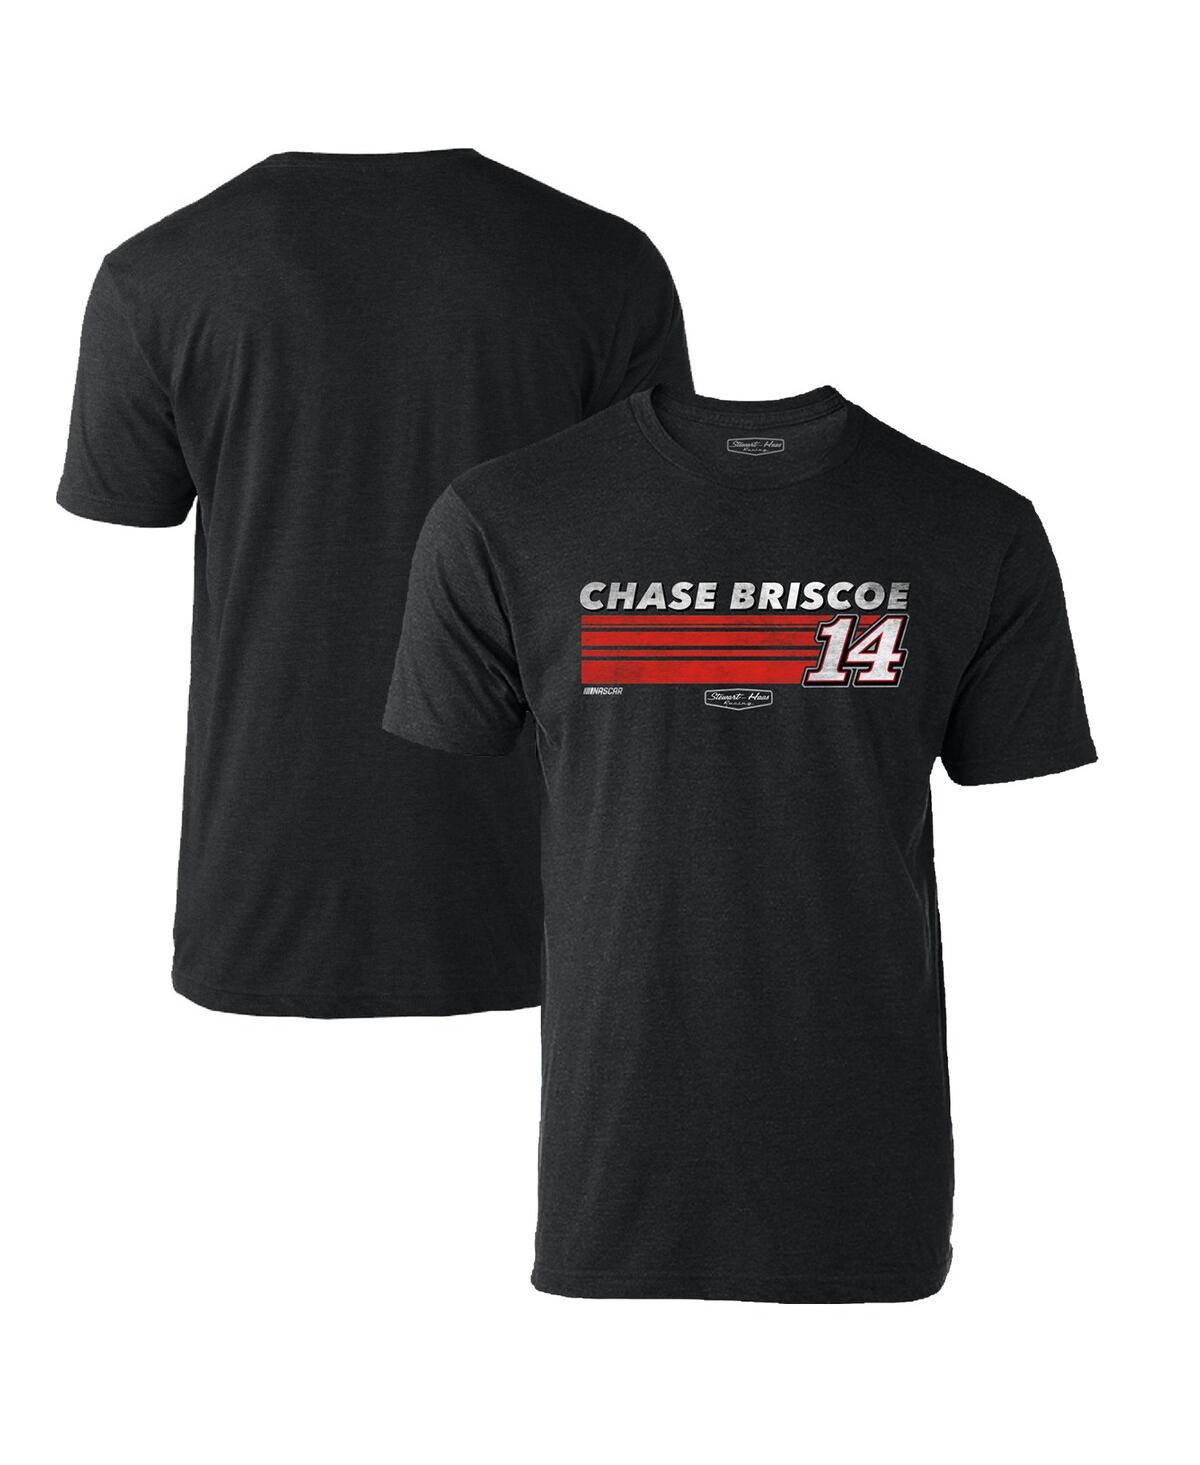 Stewart-haas Racing Team Collection Men's  Heather Charcoal Chase Briscoe Hot Lap T-shirt